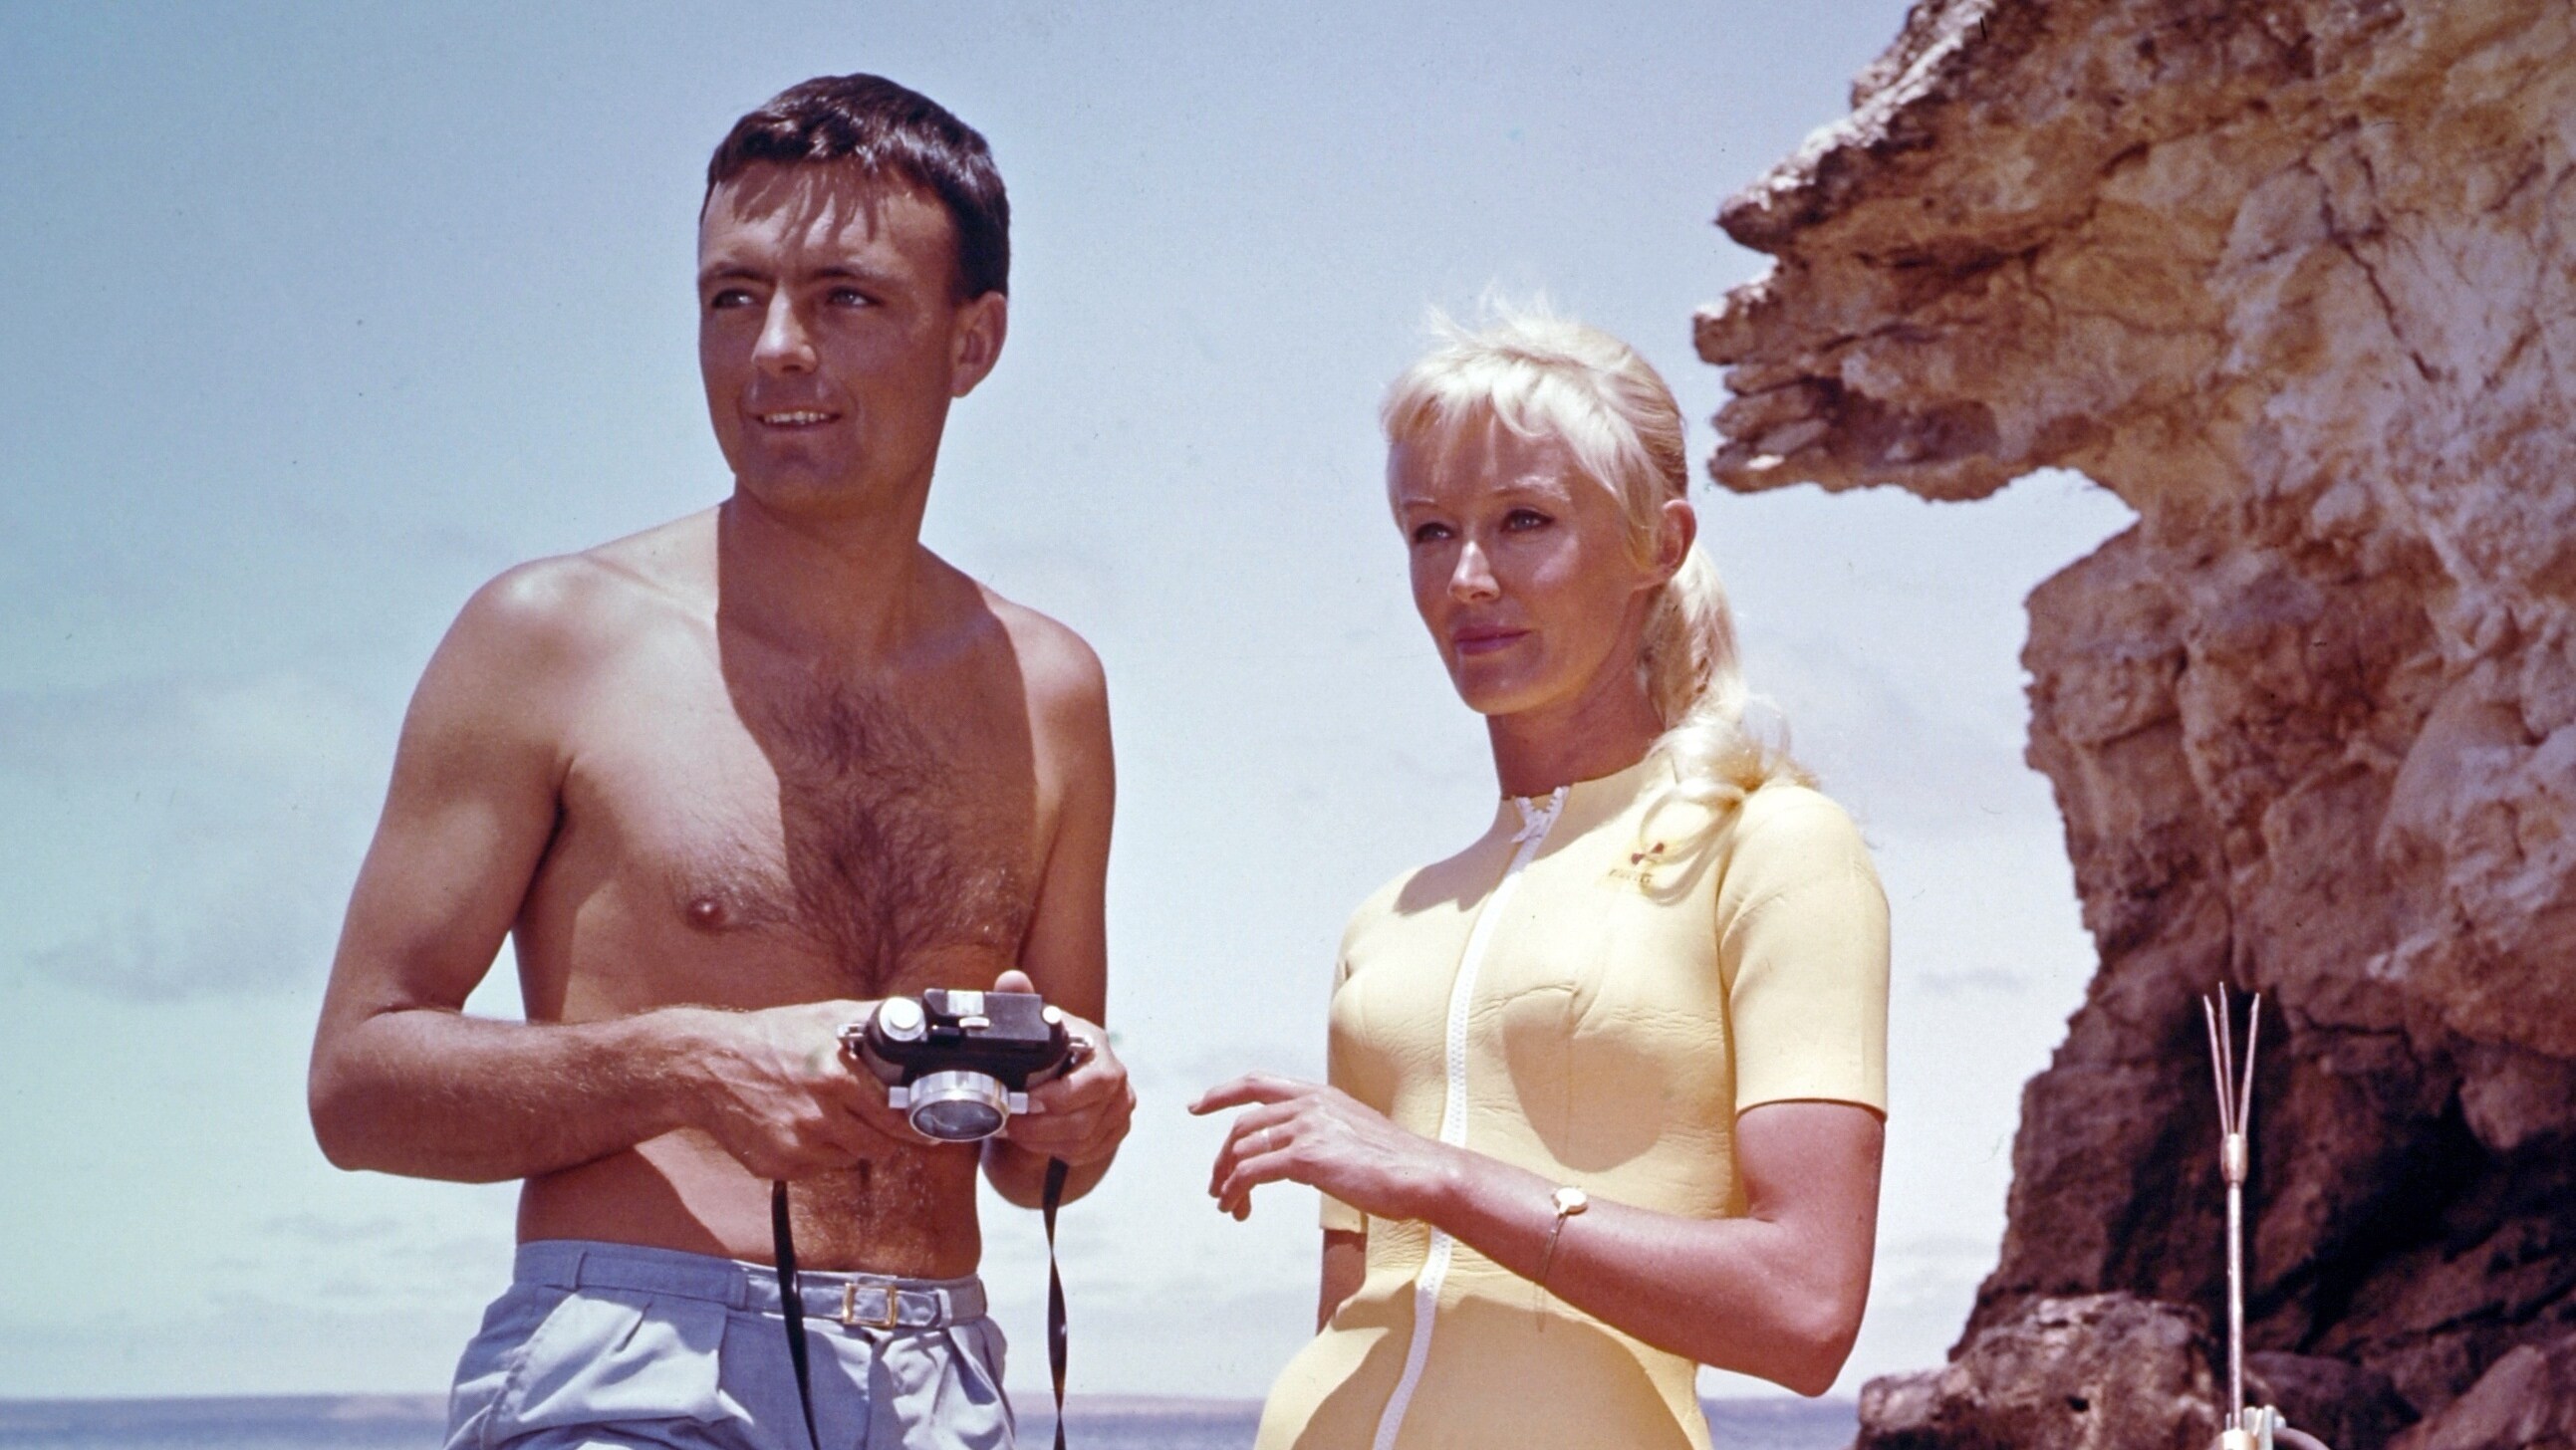 Ron & Valerie Taylor with spearfishing equipment standing on rocks in 1962.  (photo credit: Ron & Valerie Taylor)